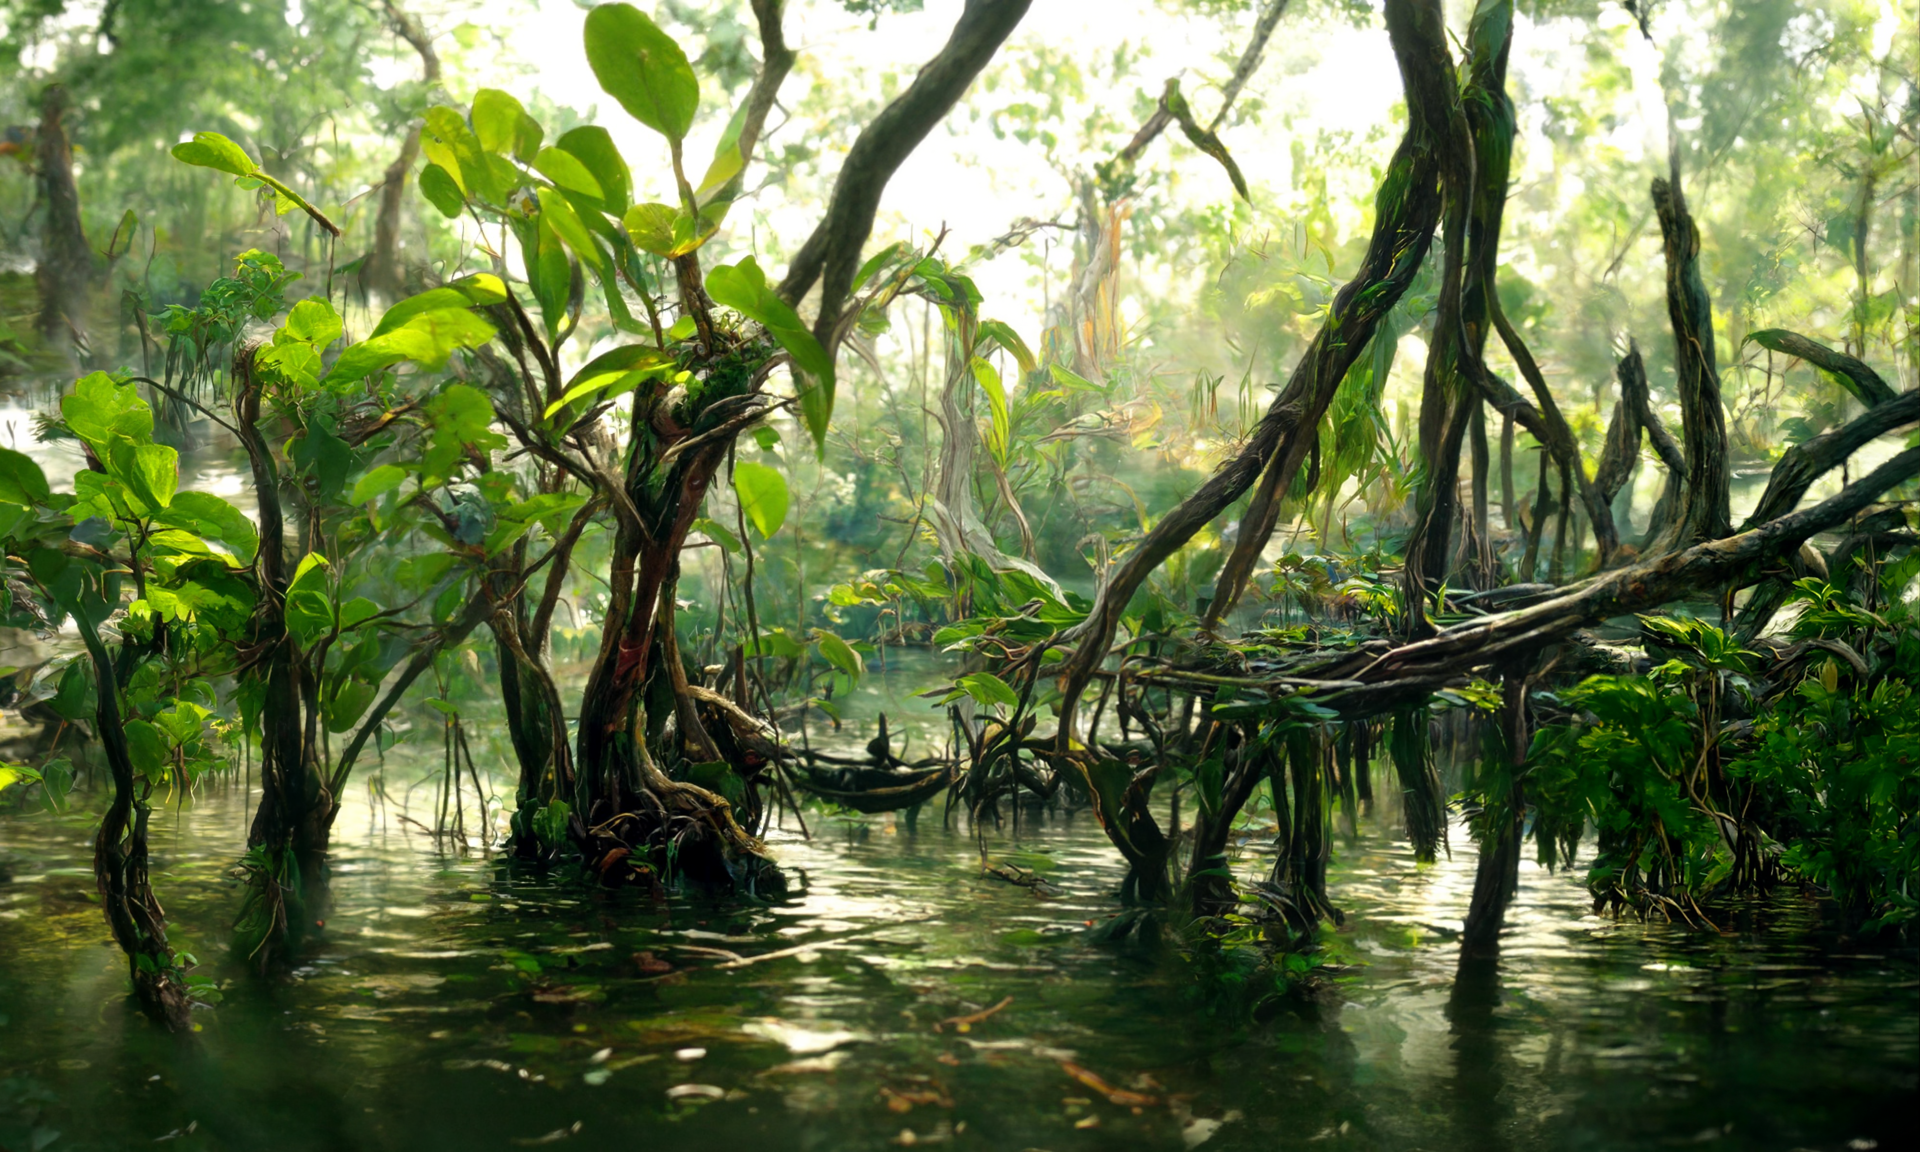 A lush green mangrove swamp, with trees and leaves growing out of the stagnant water.